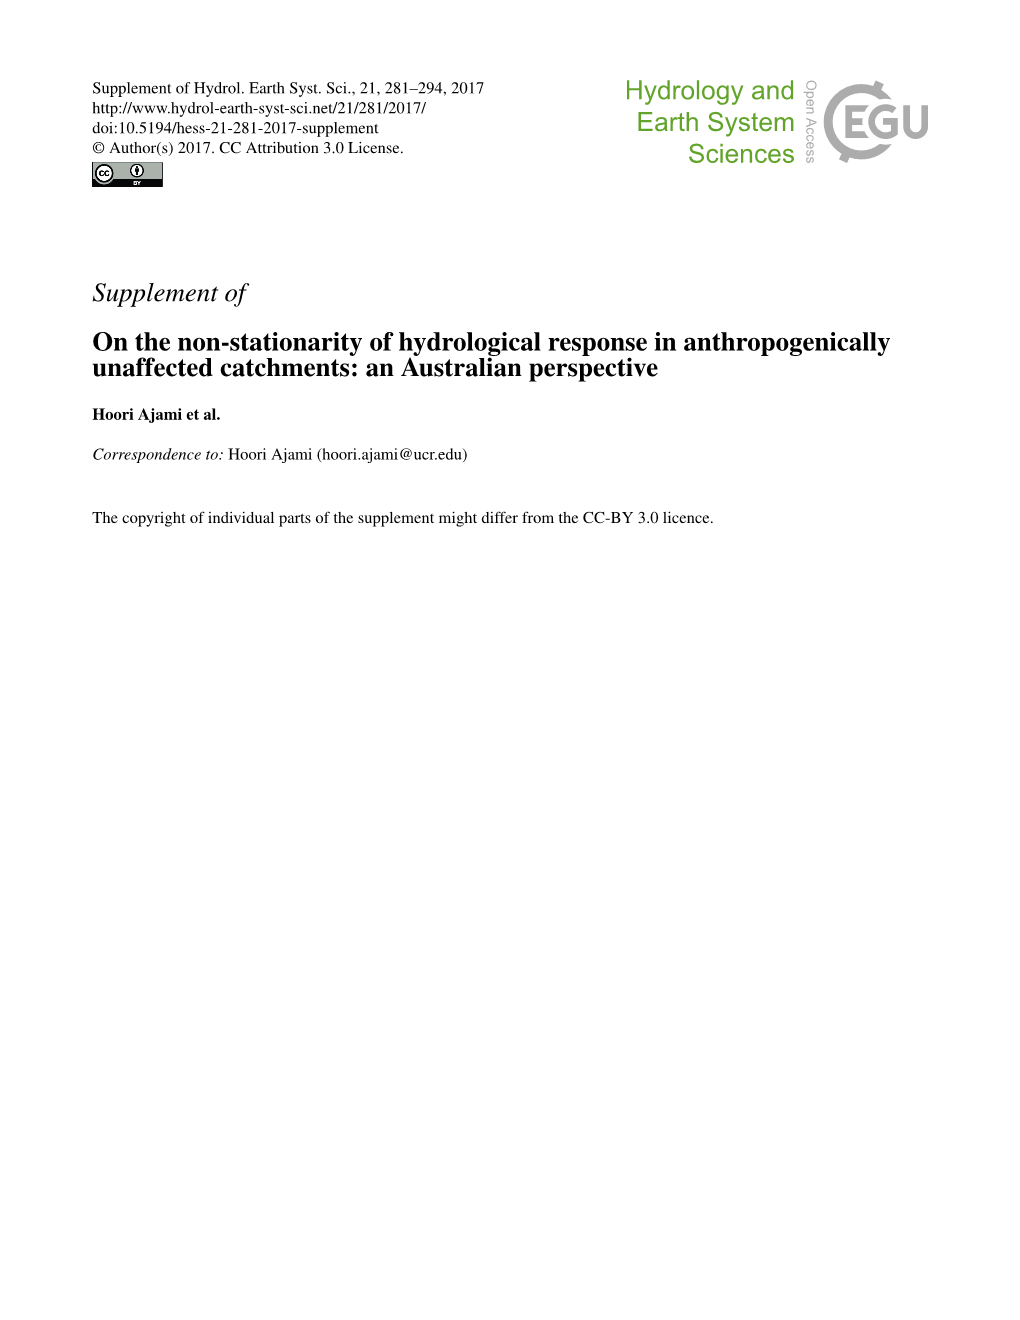 Supplement of on the Non-Stationarity of Hydrological Response in Anthropogenically Unaffected Catchments: an Australian Perspective